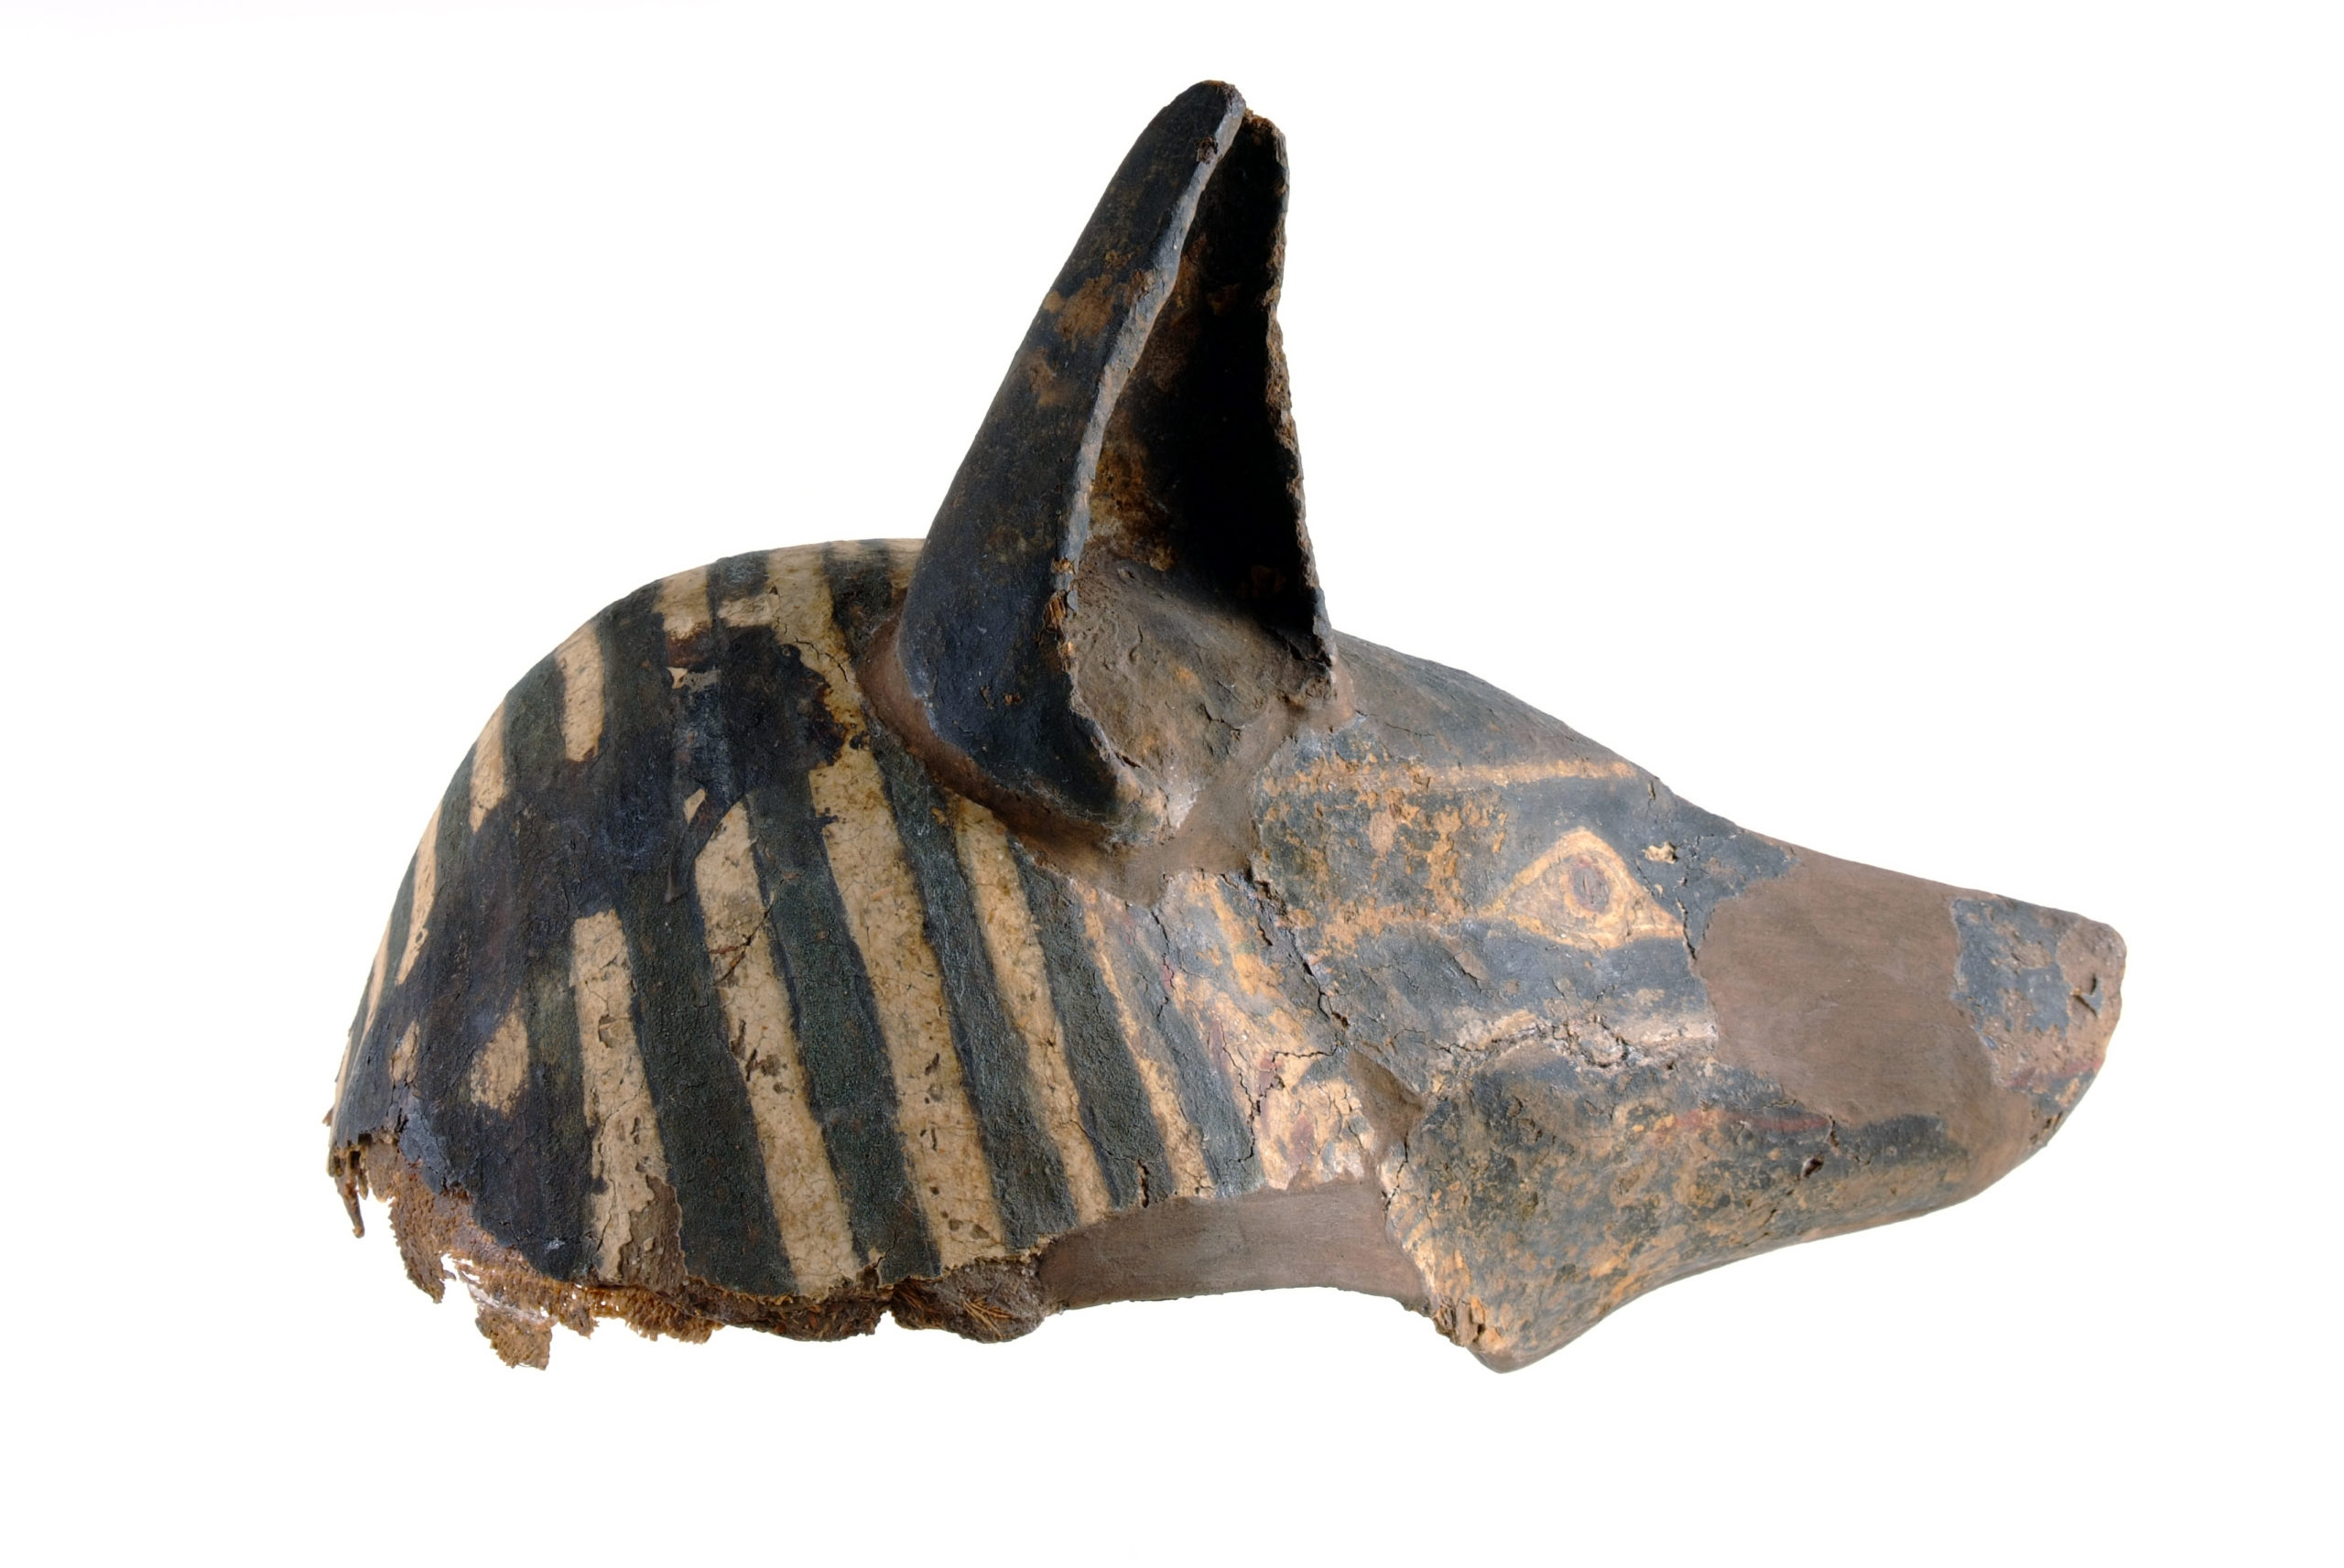 Mask likely to be worn by a male priest playing the part of Anubis in a temple during mummification or burial ritual. Probably buried with the priest who had worn it in life. Anubis mask, 8–4 B.C.E., cartonnage, coarse linen, mud plaster mixed with straw, probably excavated in Thebes, Egypt, 24 x 36 cm (Harrogate Museums and Arts)